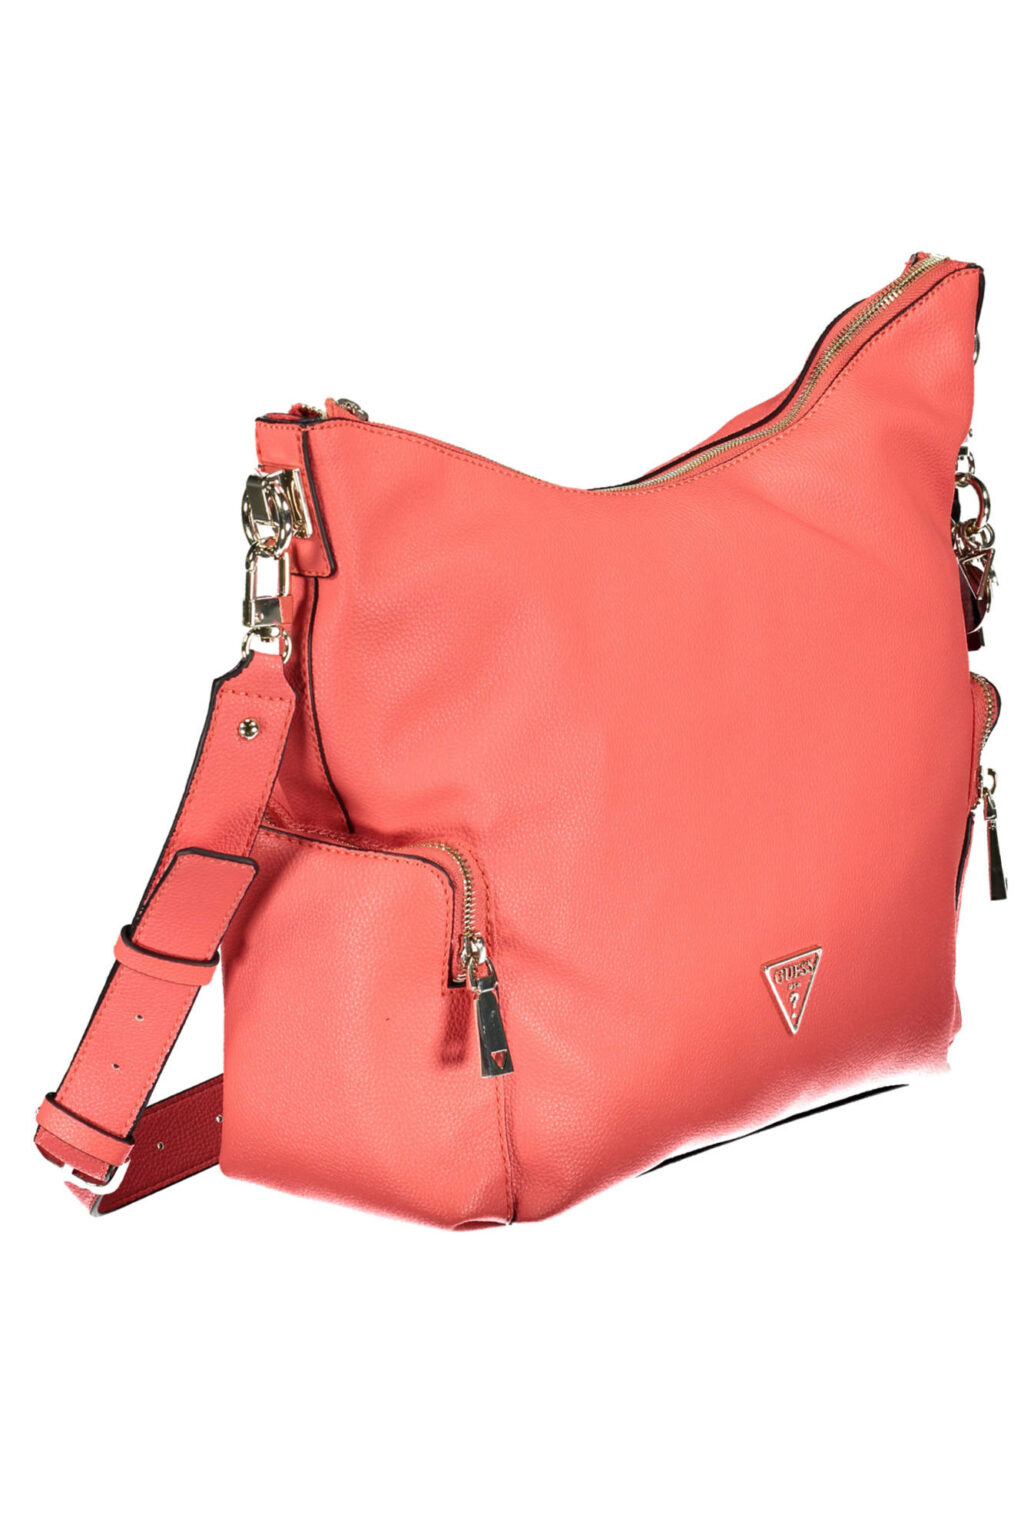 GUESS JEANS WOMEN'S BAG PINK VG787803_ROSA_CORAL